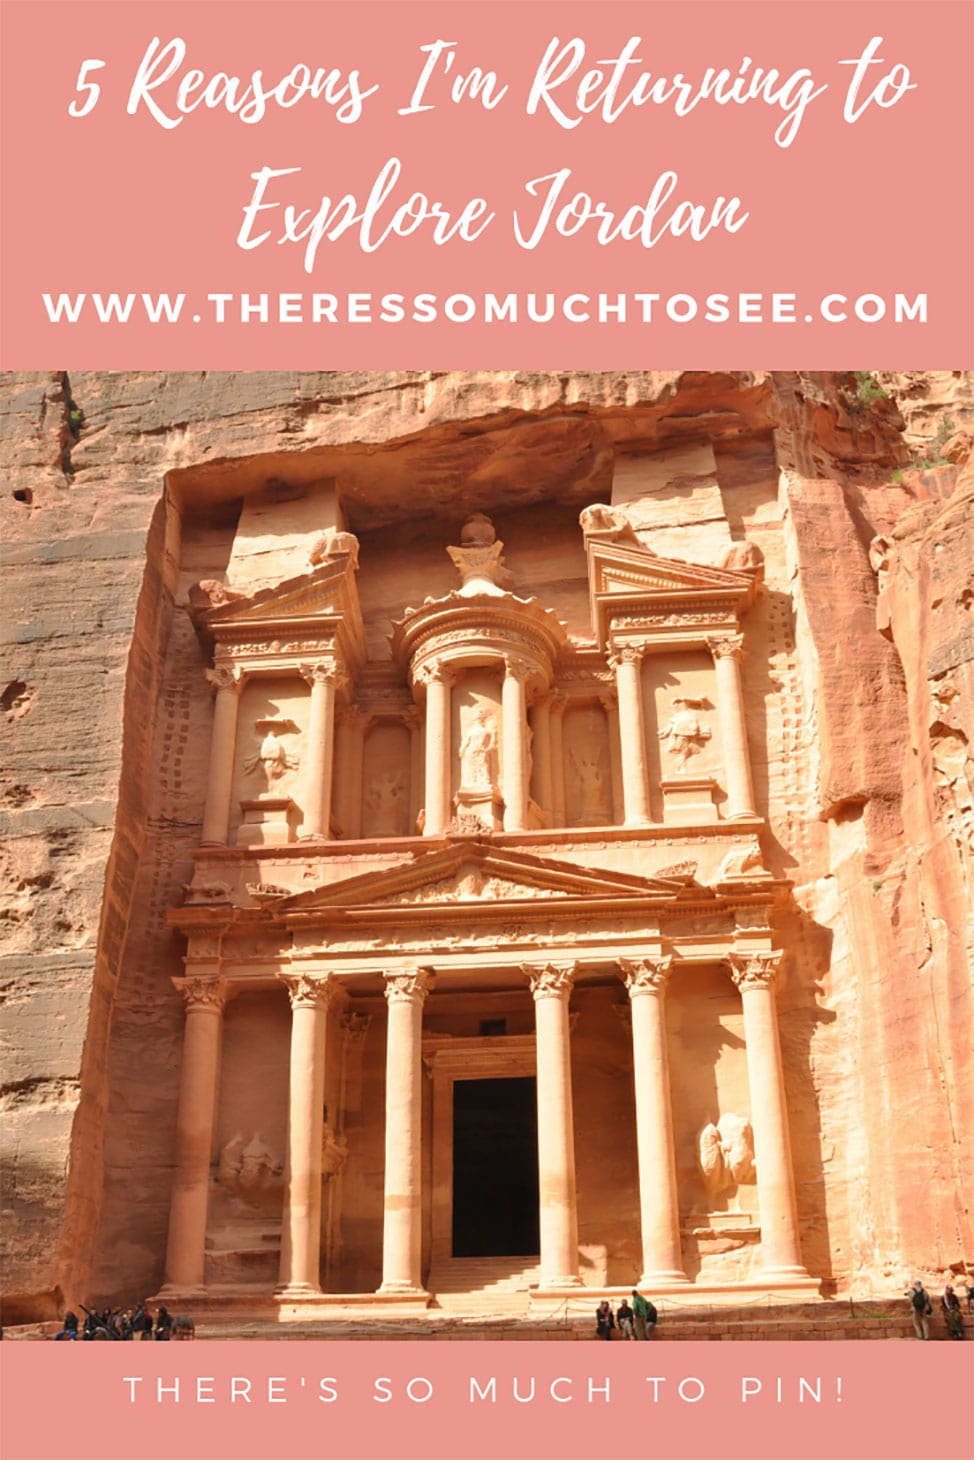 Click to read about 5 great reasons why I can't wait to return to explore Jordan...and why I hope you'll join me!